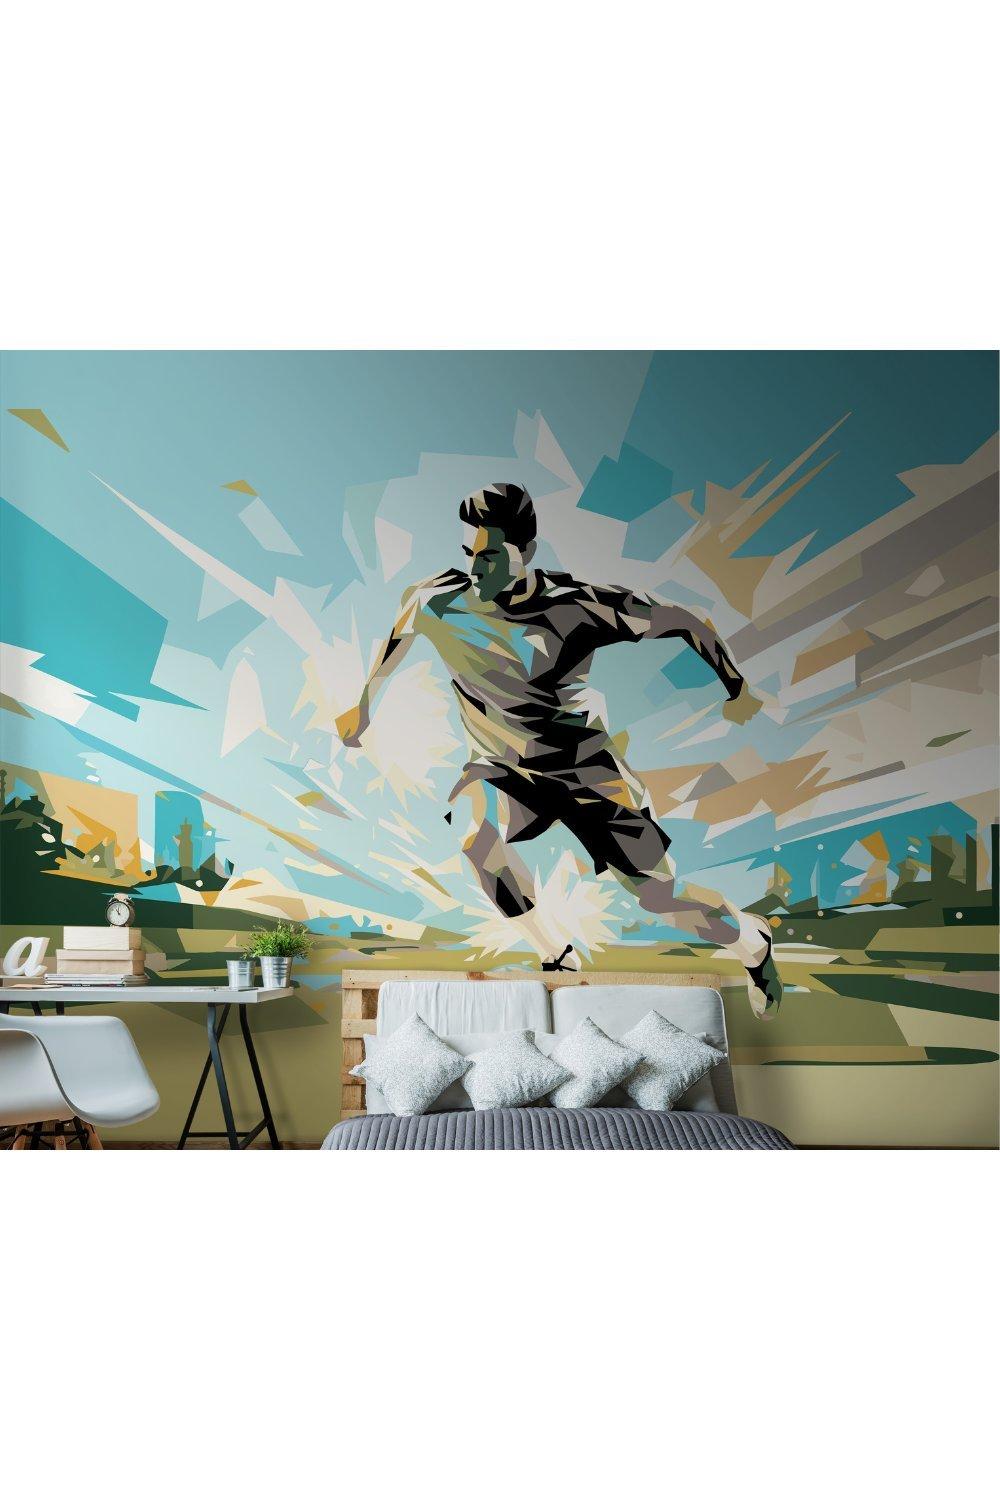 Football Player Abstract Landscape Orange Matt Smooth Paste the Wall 350cm wide x 280cm high